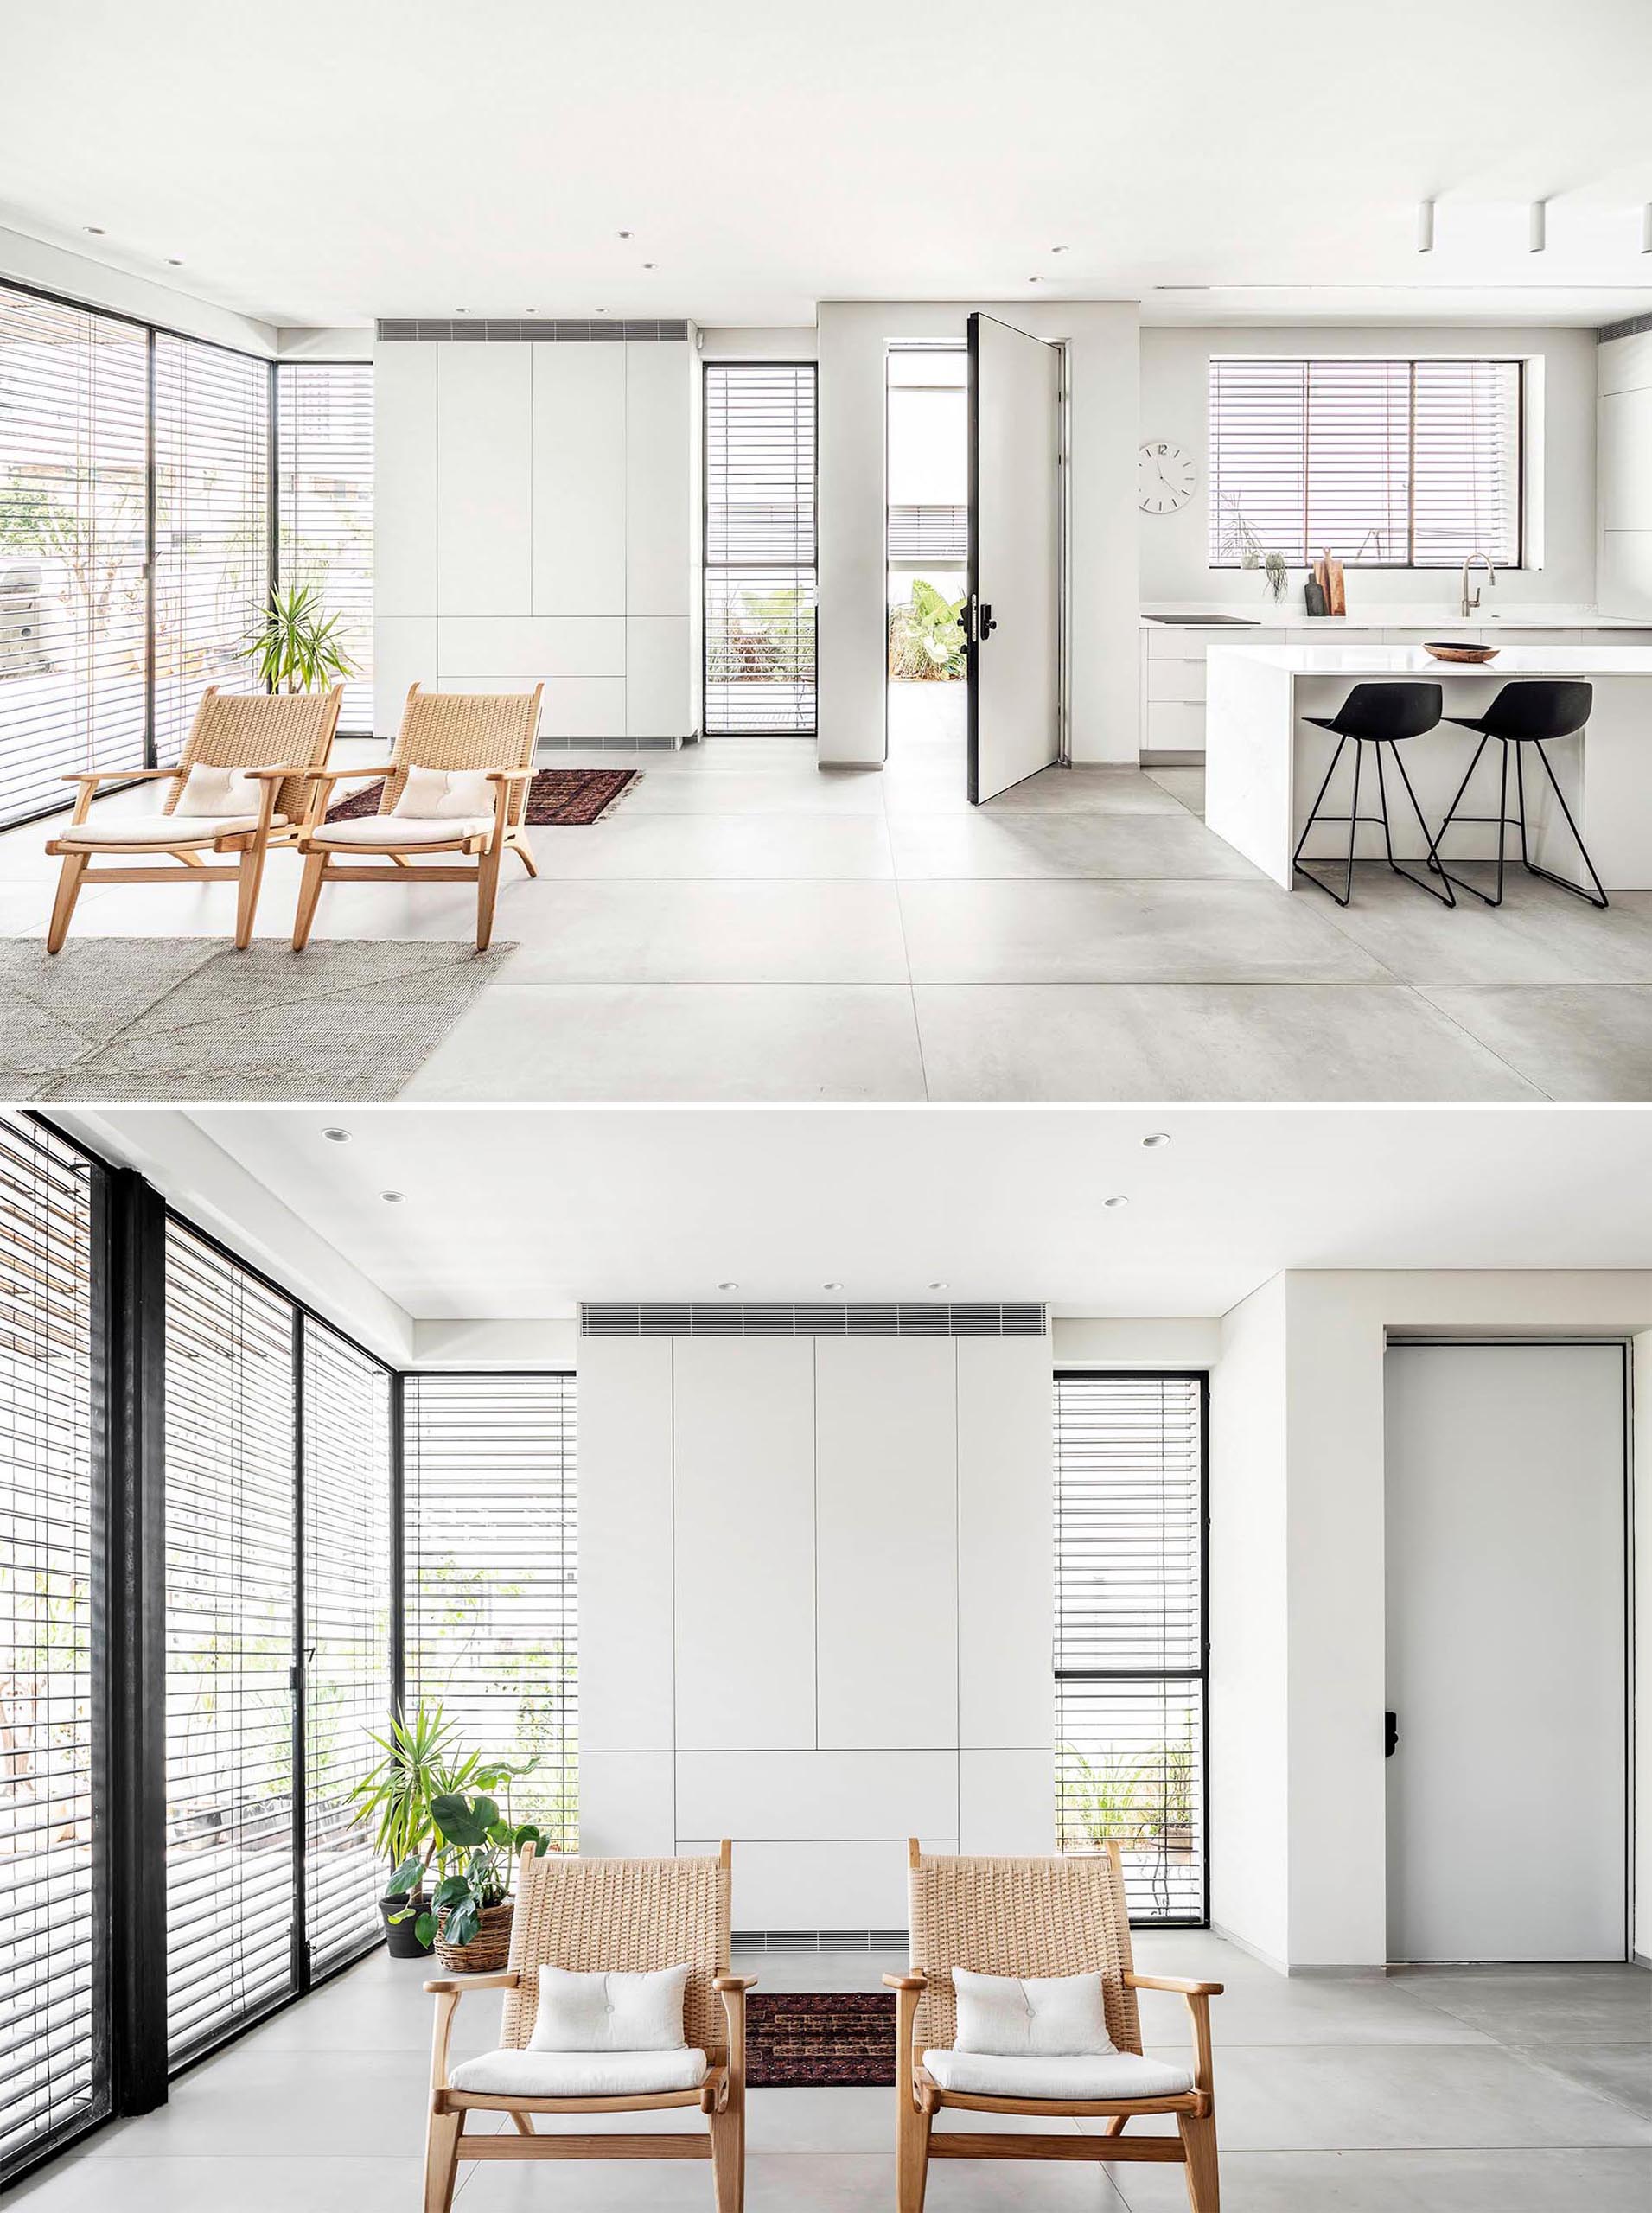 Tall windows line the walls of this modern interior and let in copious amounts of natural light into the open living room, dining area, and kitchen.